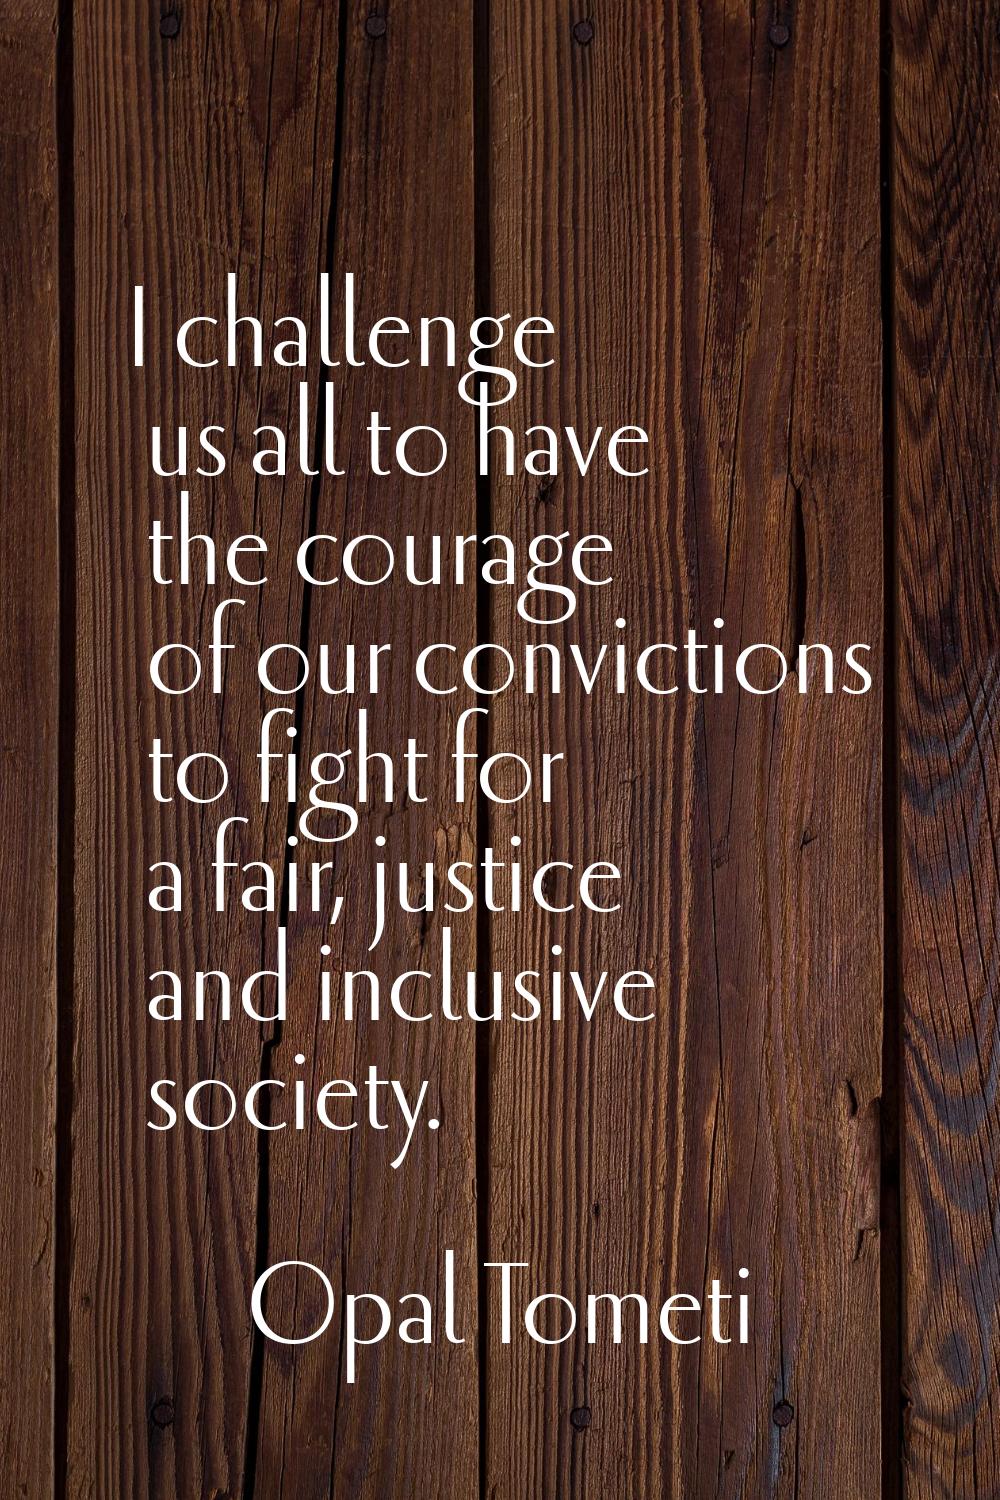 I challenge us all to have the courage of our convictions to fight for a fair, justice and inclusiv